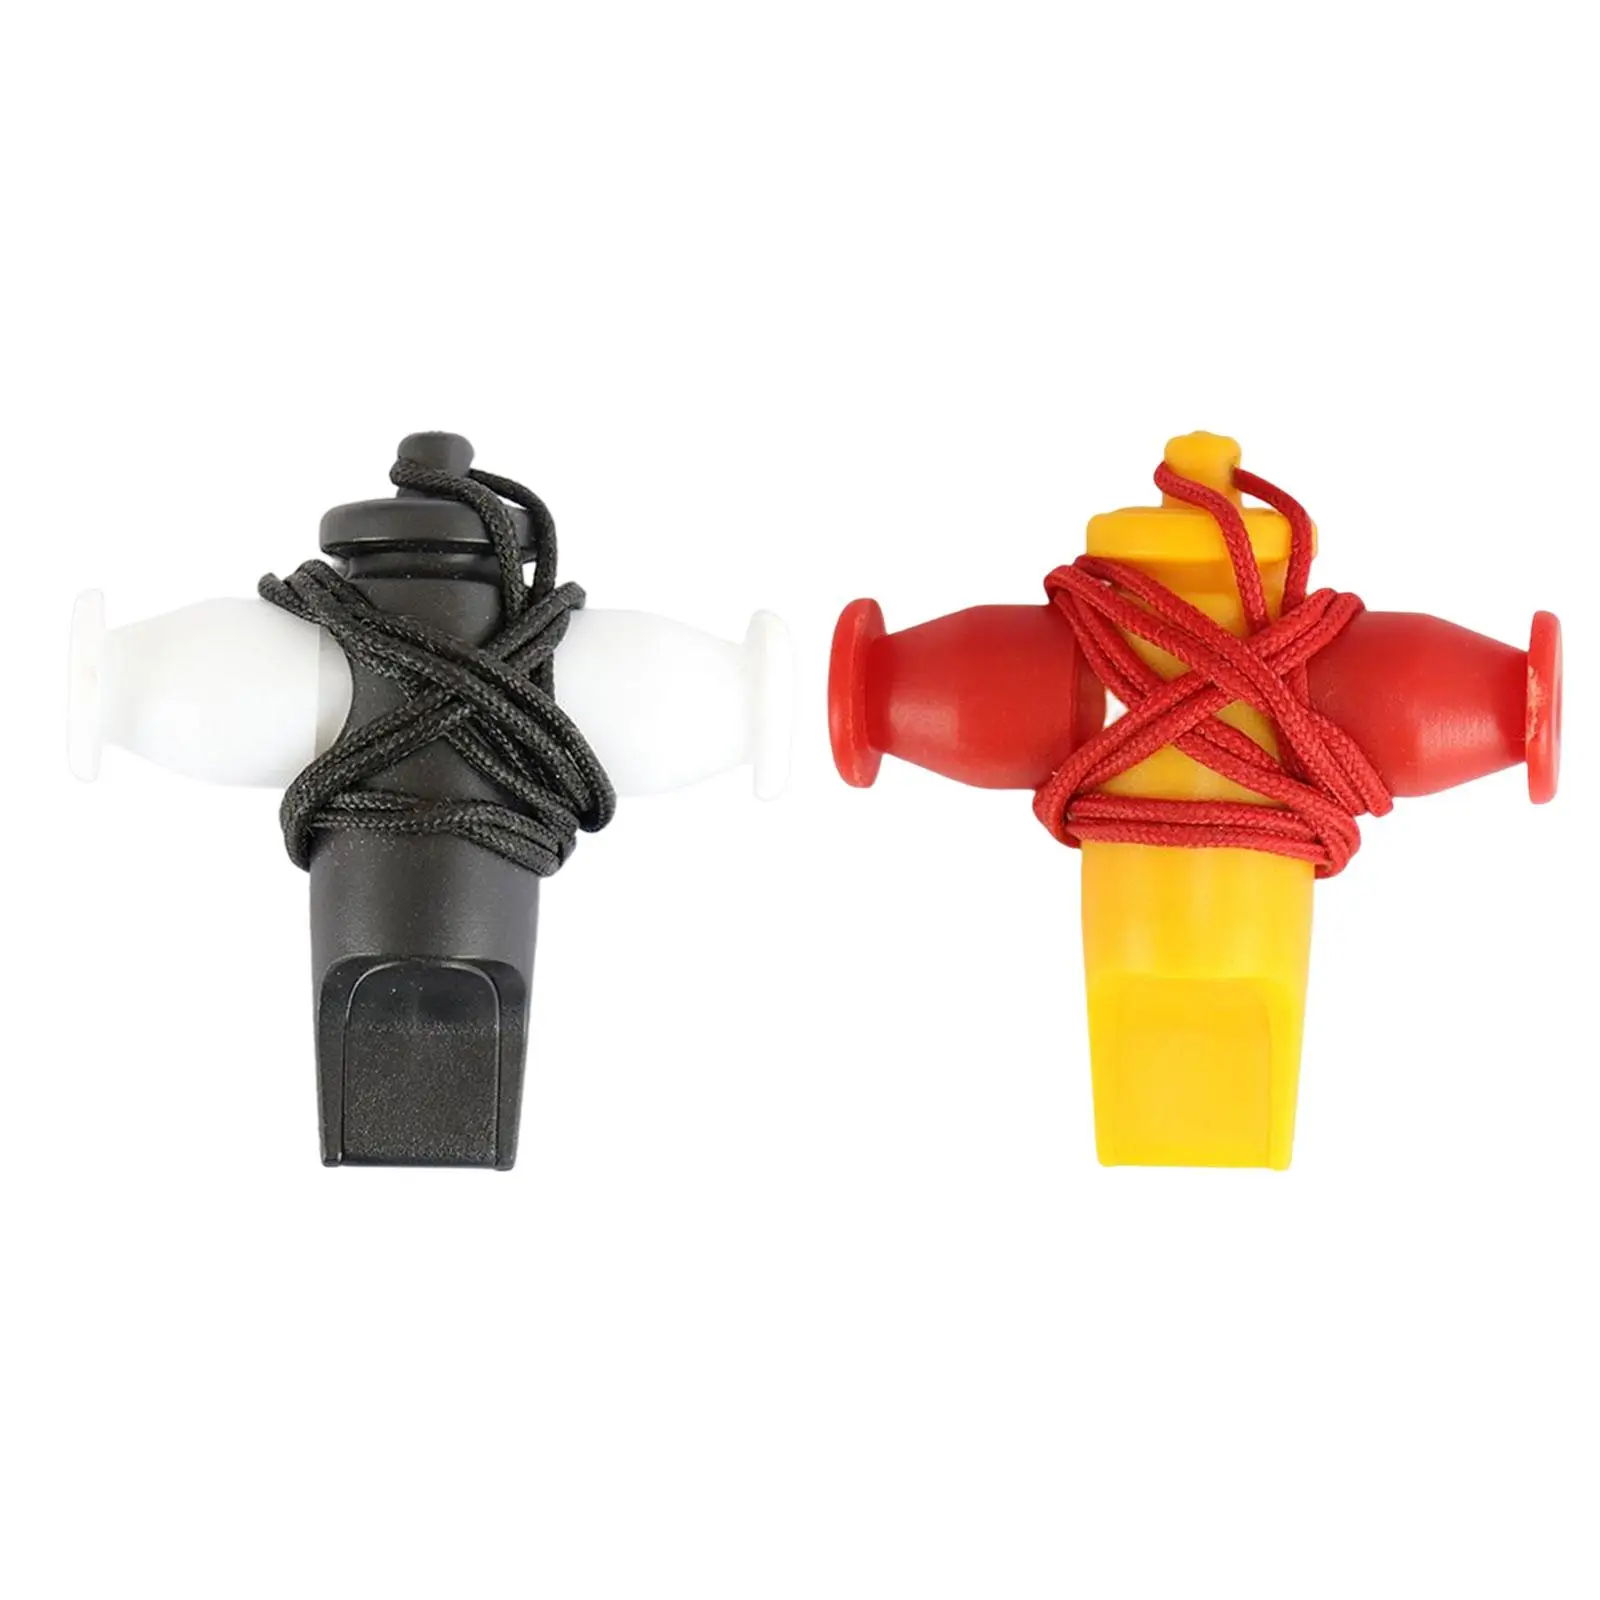 Whistle Musical Instrument Outdoor Whistle for Children Men Referee